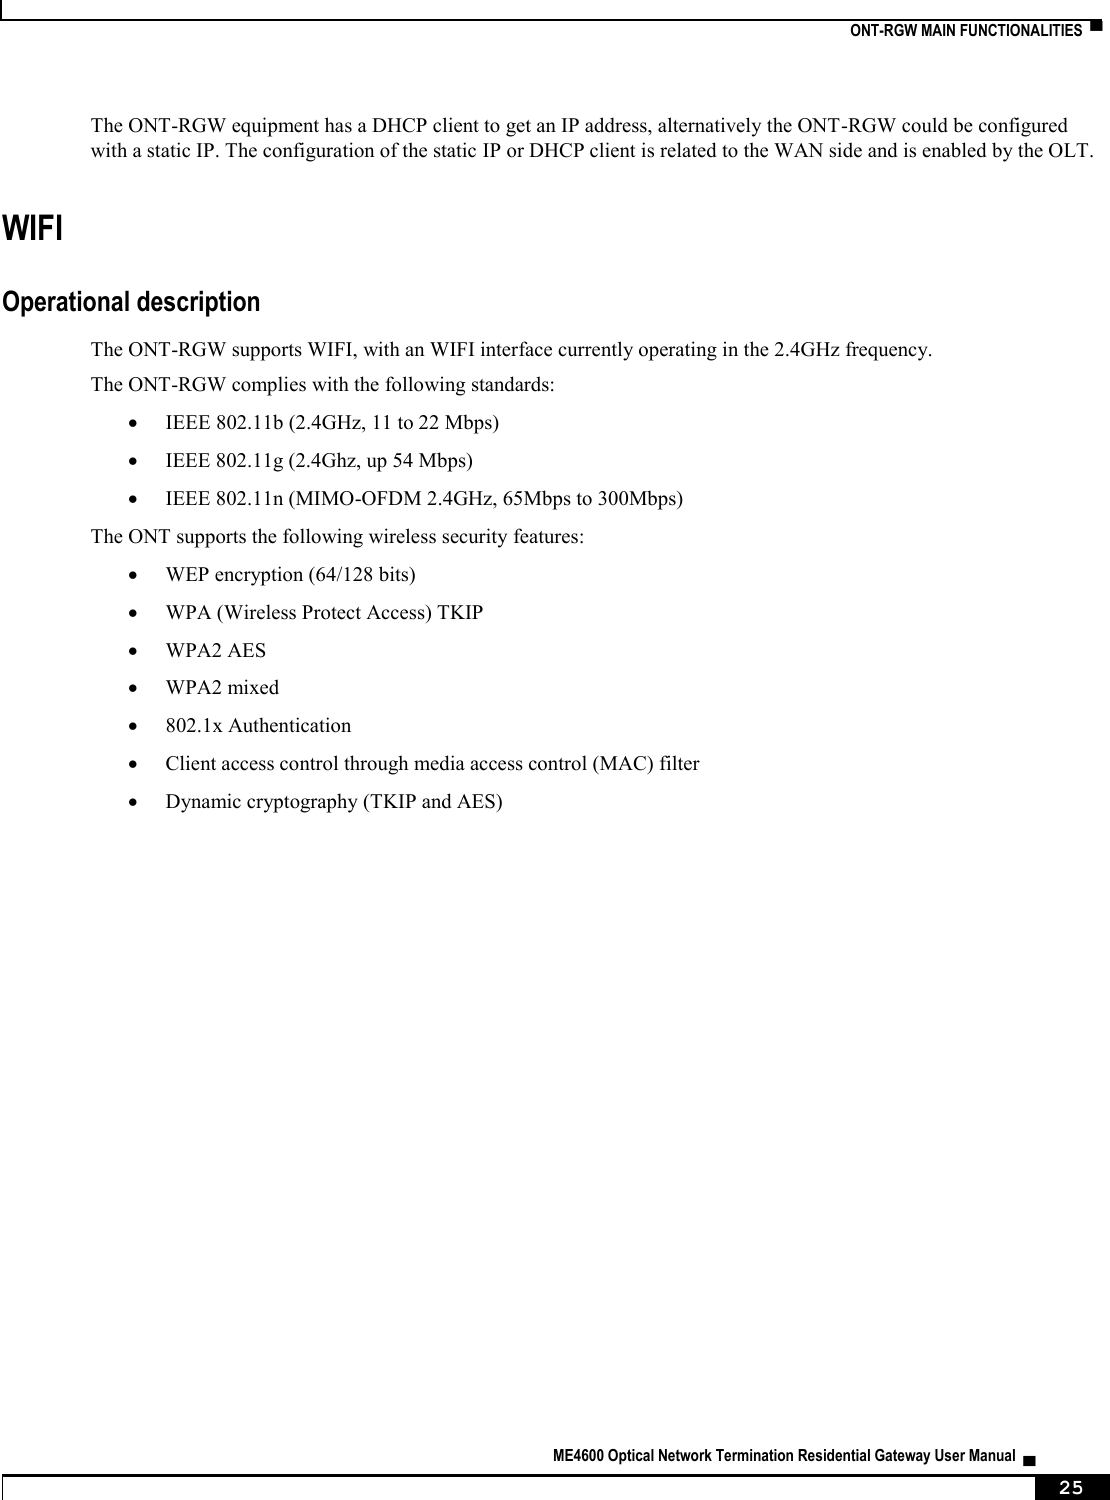    ONT-RGW MAIN FUNCTIONALITIES  ▀   ME4600 Optical Network Termination Residential Gateway User Manual  ▄     25 The ONT-RGW equipment has a DHCP client to get an IP address, alternatively the ONT-RGW could be configured with a static IP. The configuration of the static IP or DHCP client is related to the WAN side and is enabled by the OLT. WIFI Operational description The ONT-RGW supports WIFI, with an WIFI interface currently operating in the 2.4GHz frequency. The ONT-RGW complies with the following standards:  IEEE 802.11b (2.4GHz, 11 to 22 Mbps)  IEEE 802.11g (2.4Ghz, up 54 Mbps)  IEEE 802.11n (MIMO-OFDM 2.4GHz, 65Mbps to 300Mbps) The ONT supports the following wireless security features:  WEP encryption (64/128 bits)  WPA (Wireless Protect Access) TKIP  WPA2 AES  WPA2 mixed  802.1x Authentication  Client access control through media access control (MAC) filter  Dynamic cryptography (TKIP and AES)    